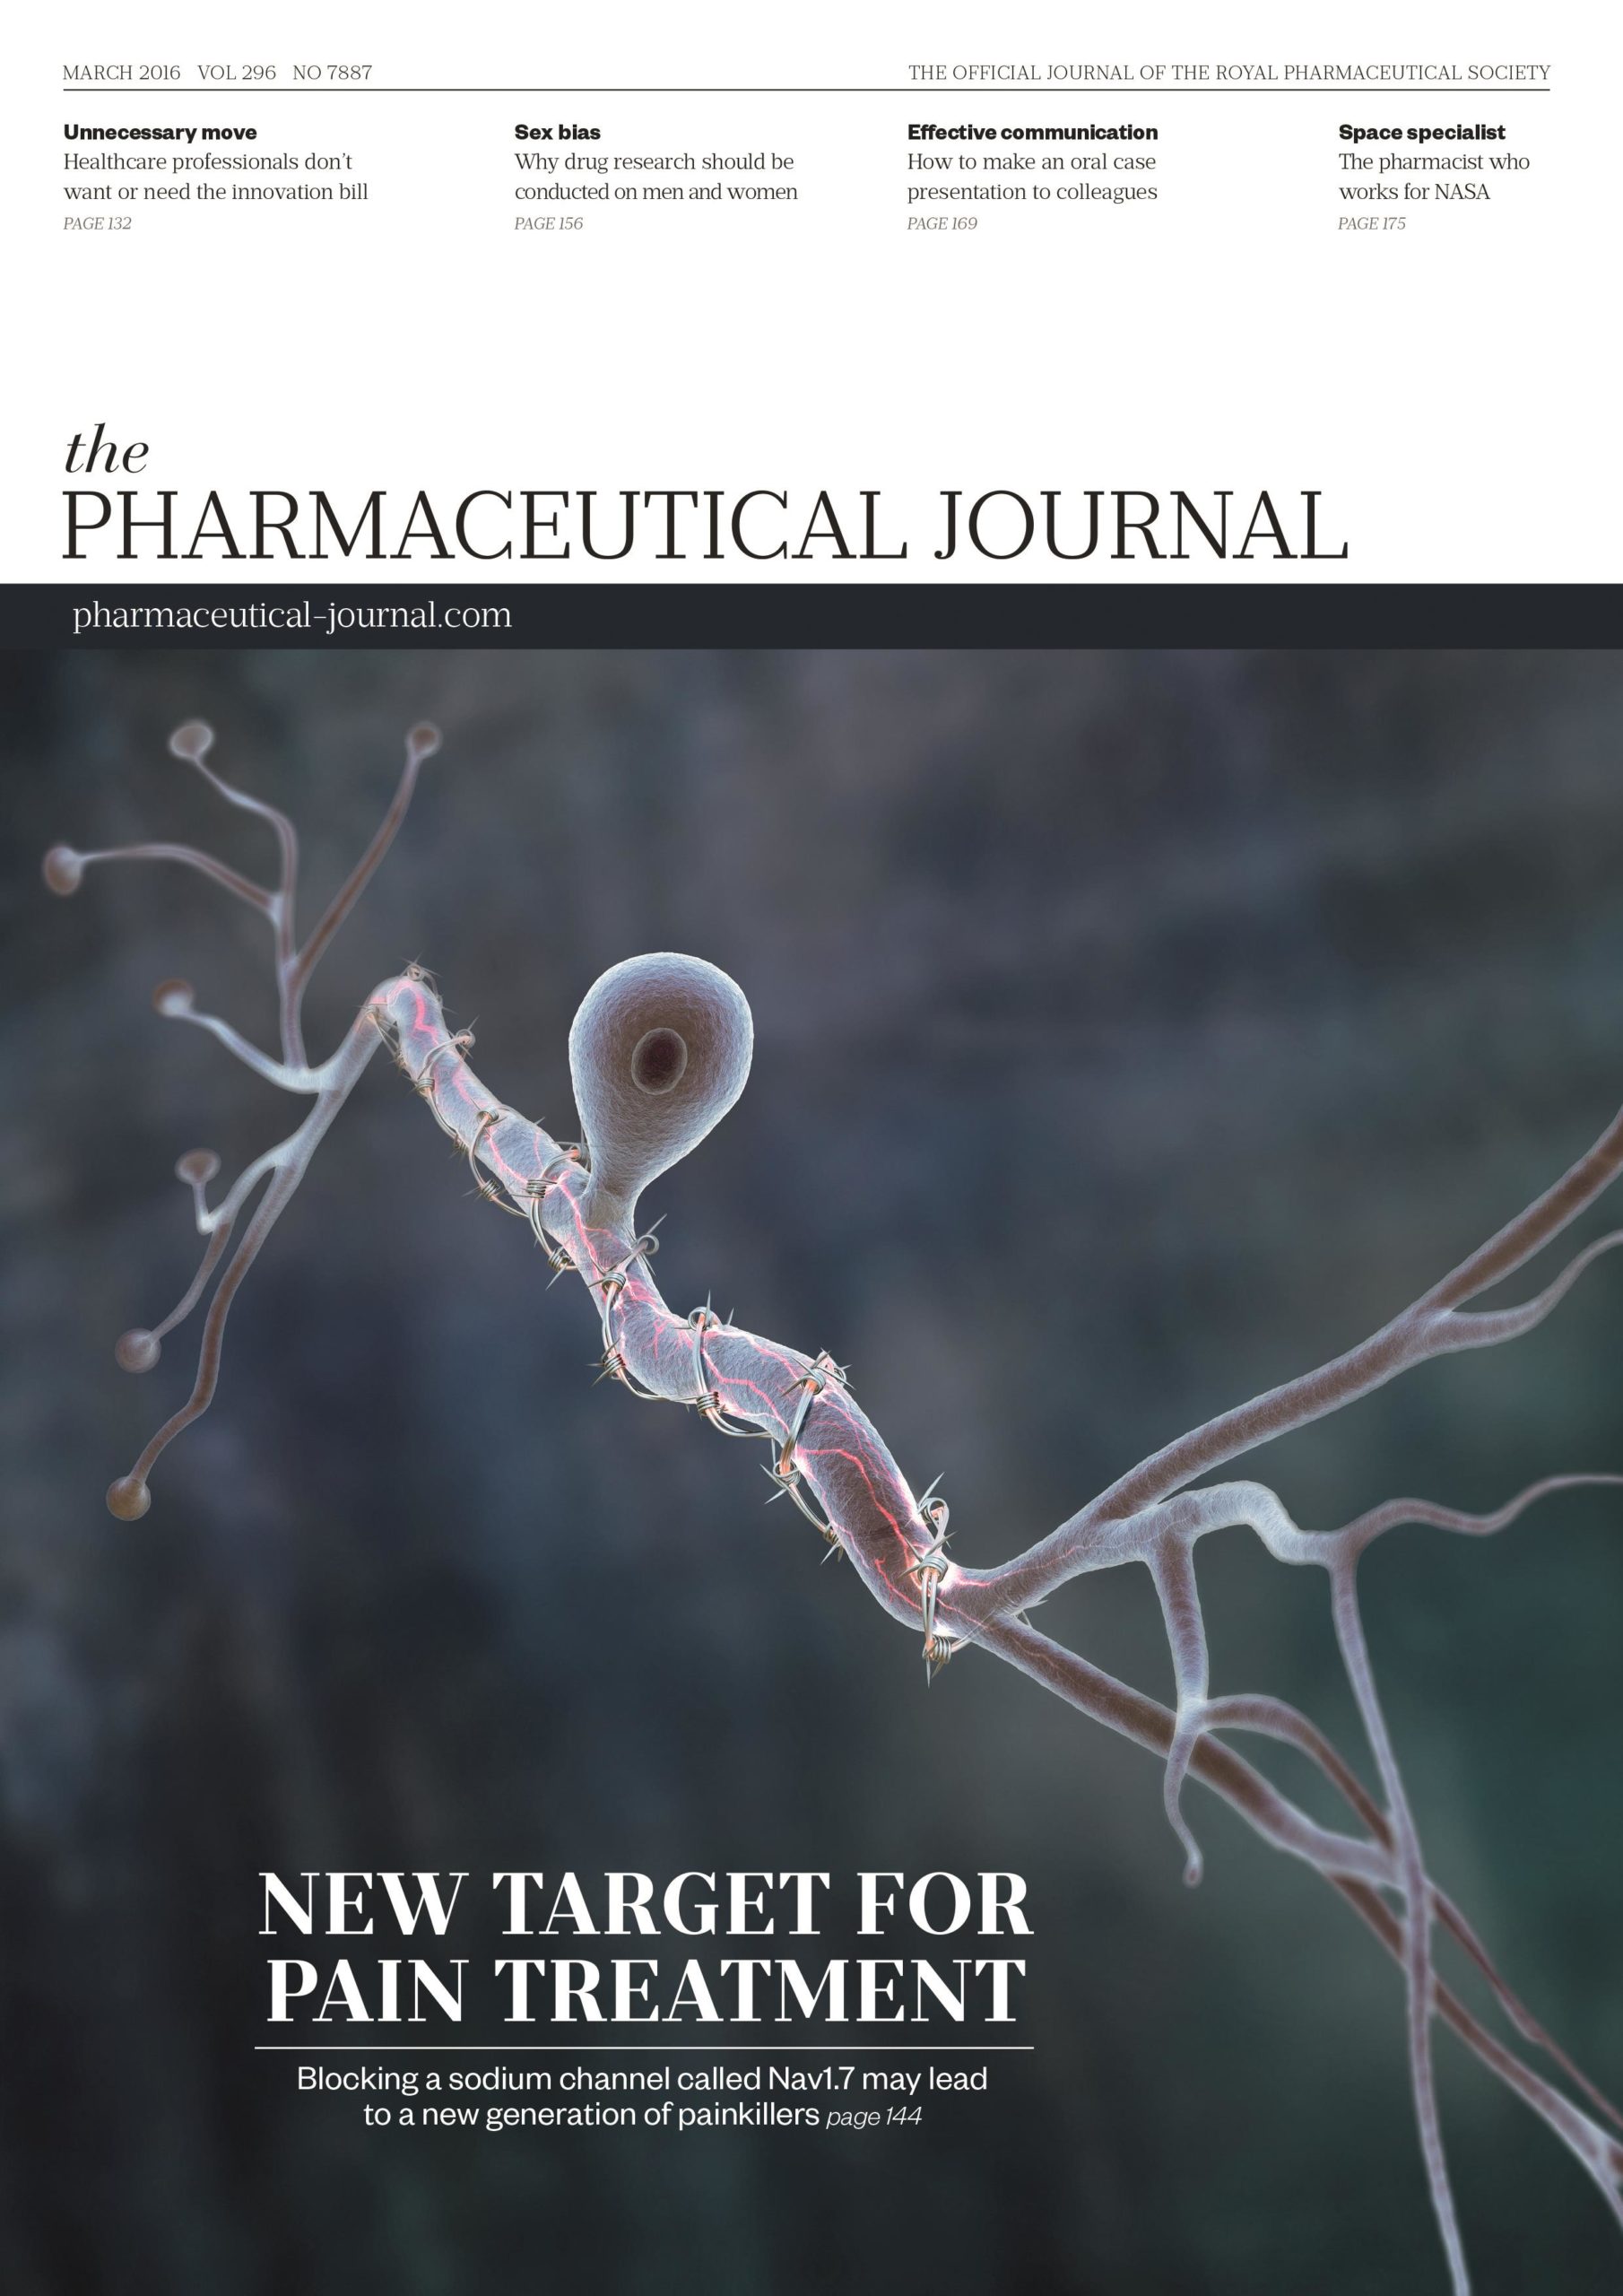 Publication issue cover for PJ, March 2016, Vol 296, No 7887